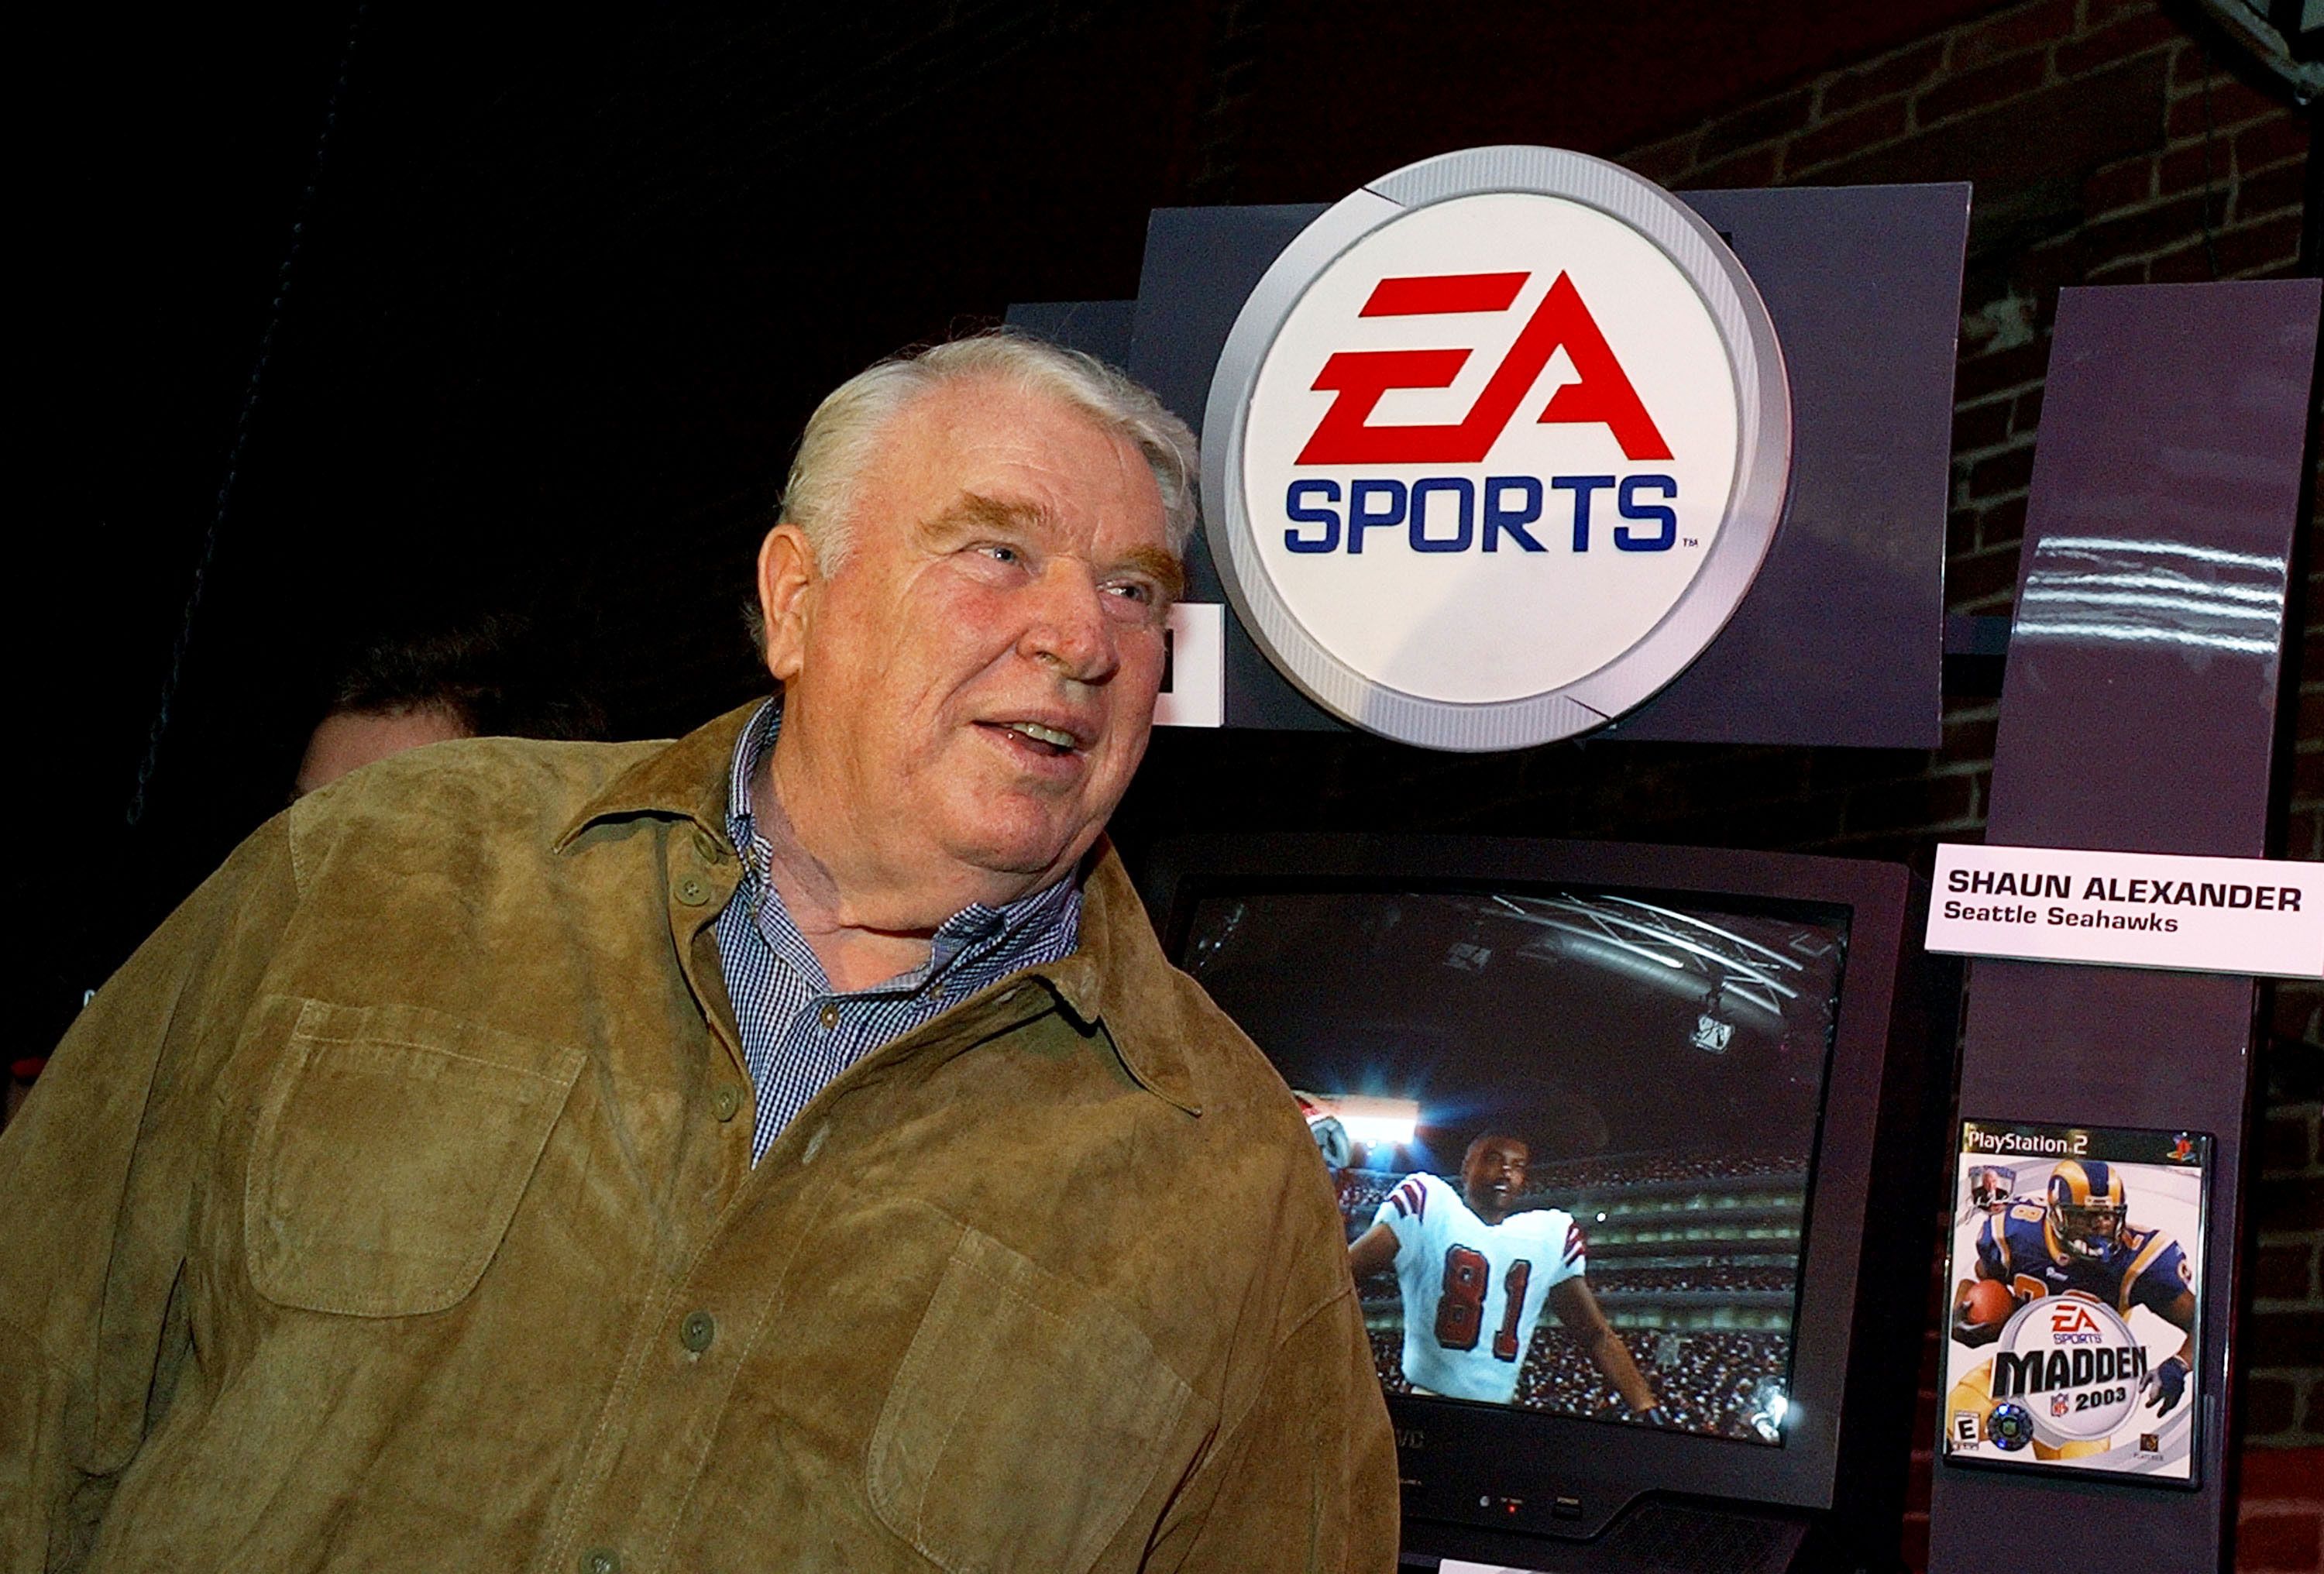 John Madden: Legendary NFL coach and broadcaster has died at age